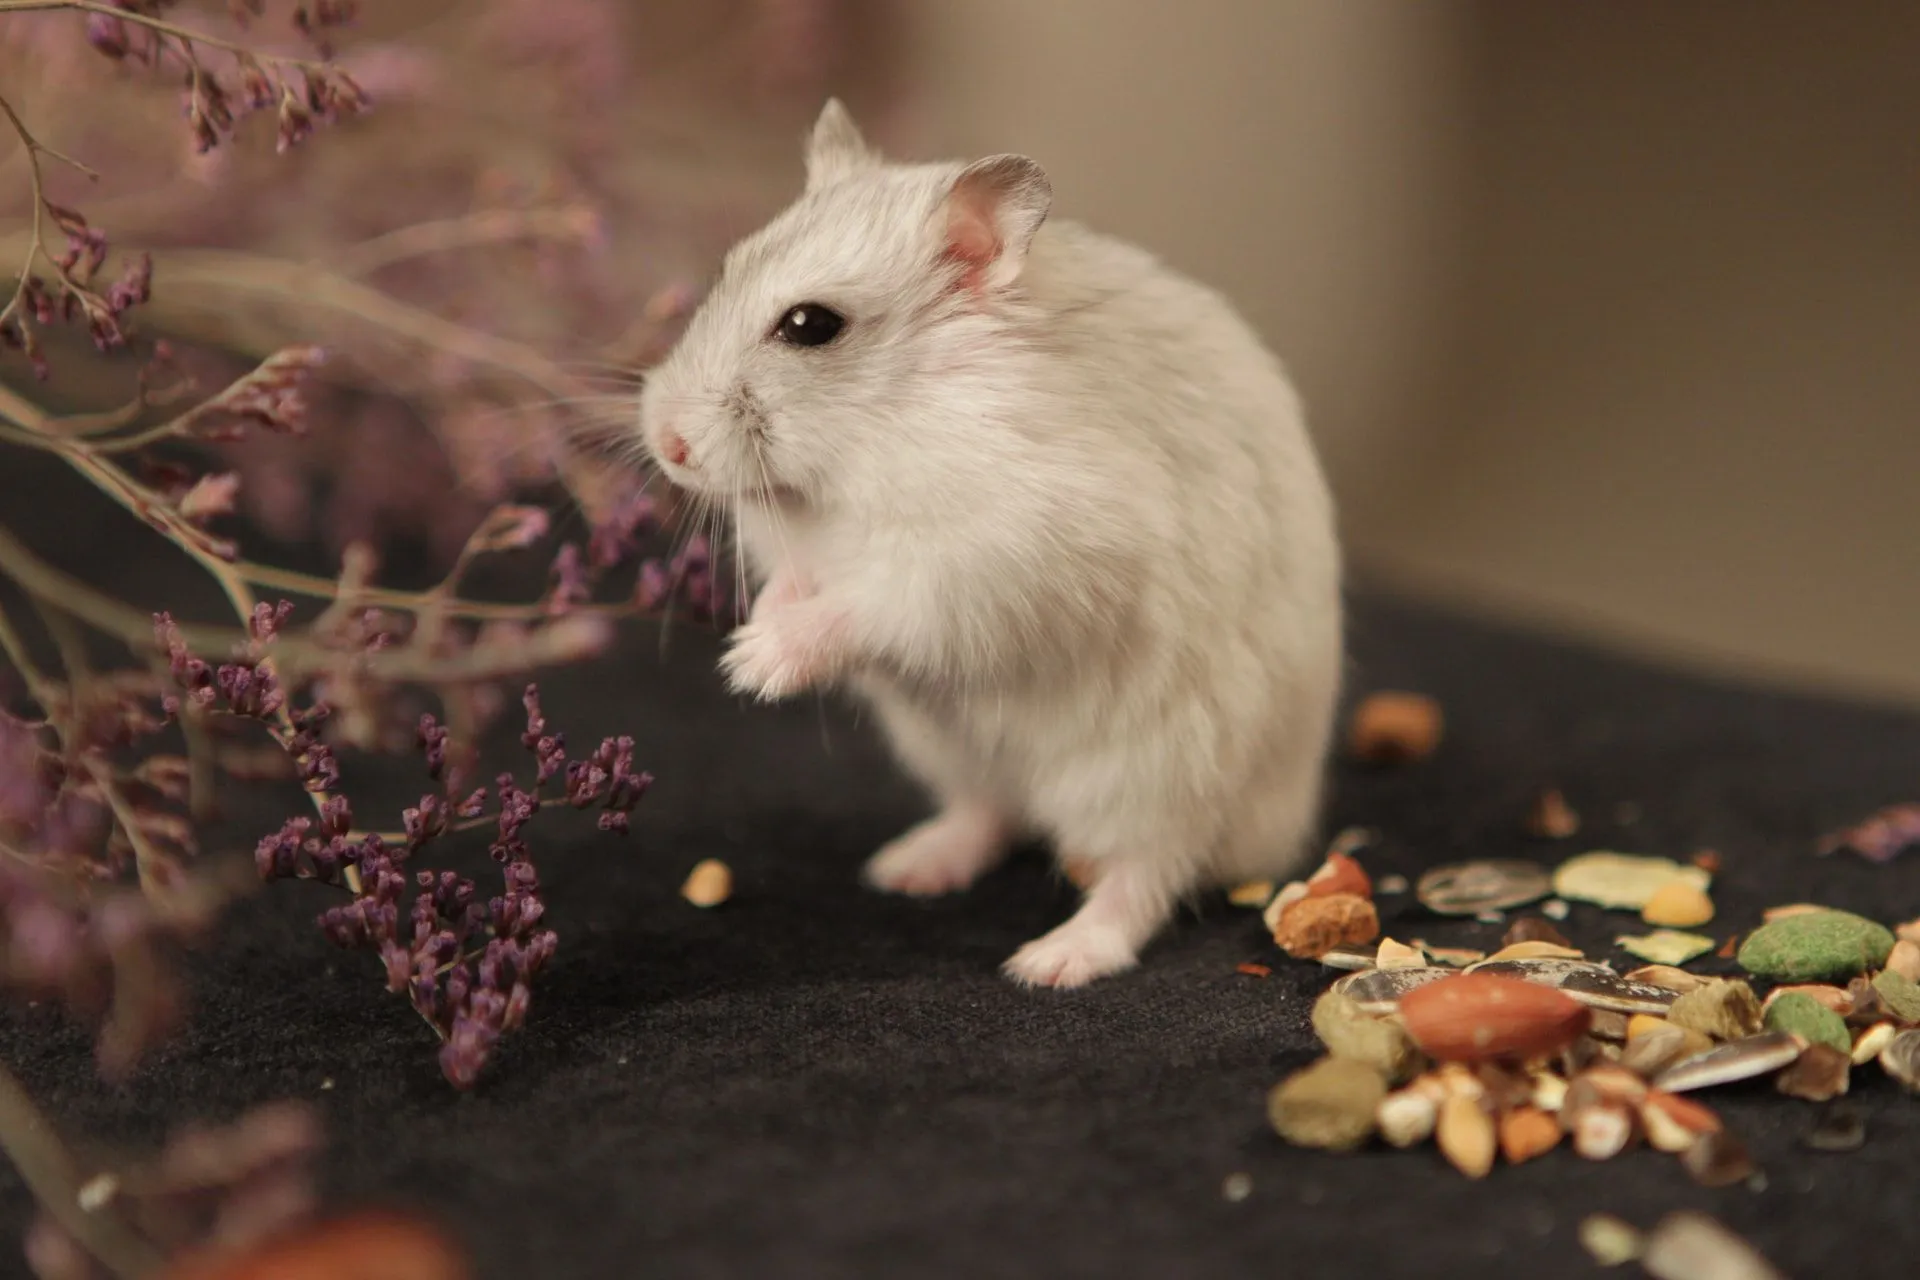 Peanuts can be fed to your furry hamster pets occasionally.